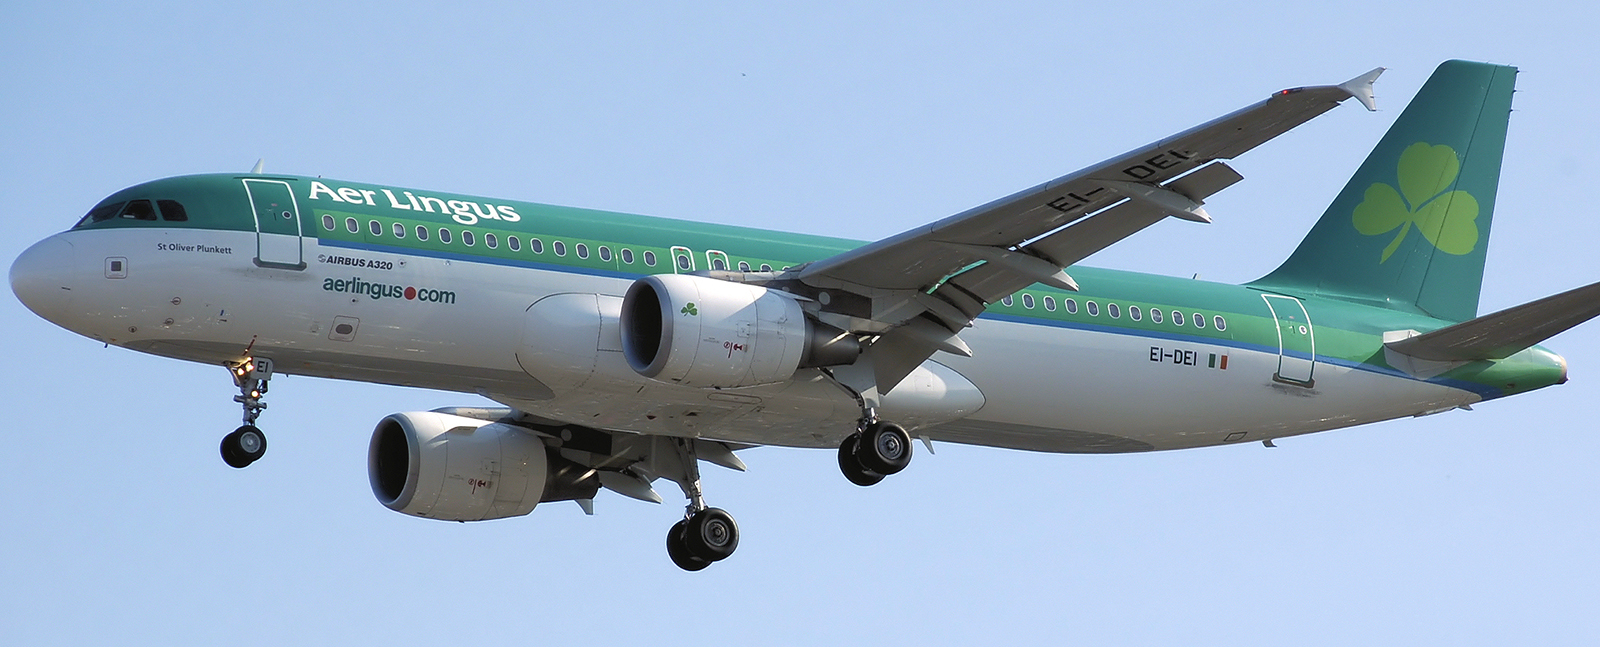 Aer Lingus to add four new transatlantic routes from Manchester